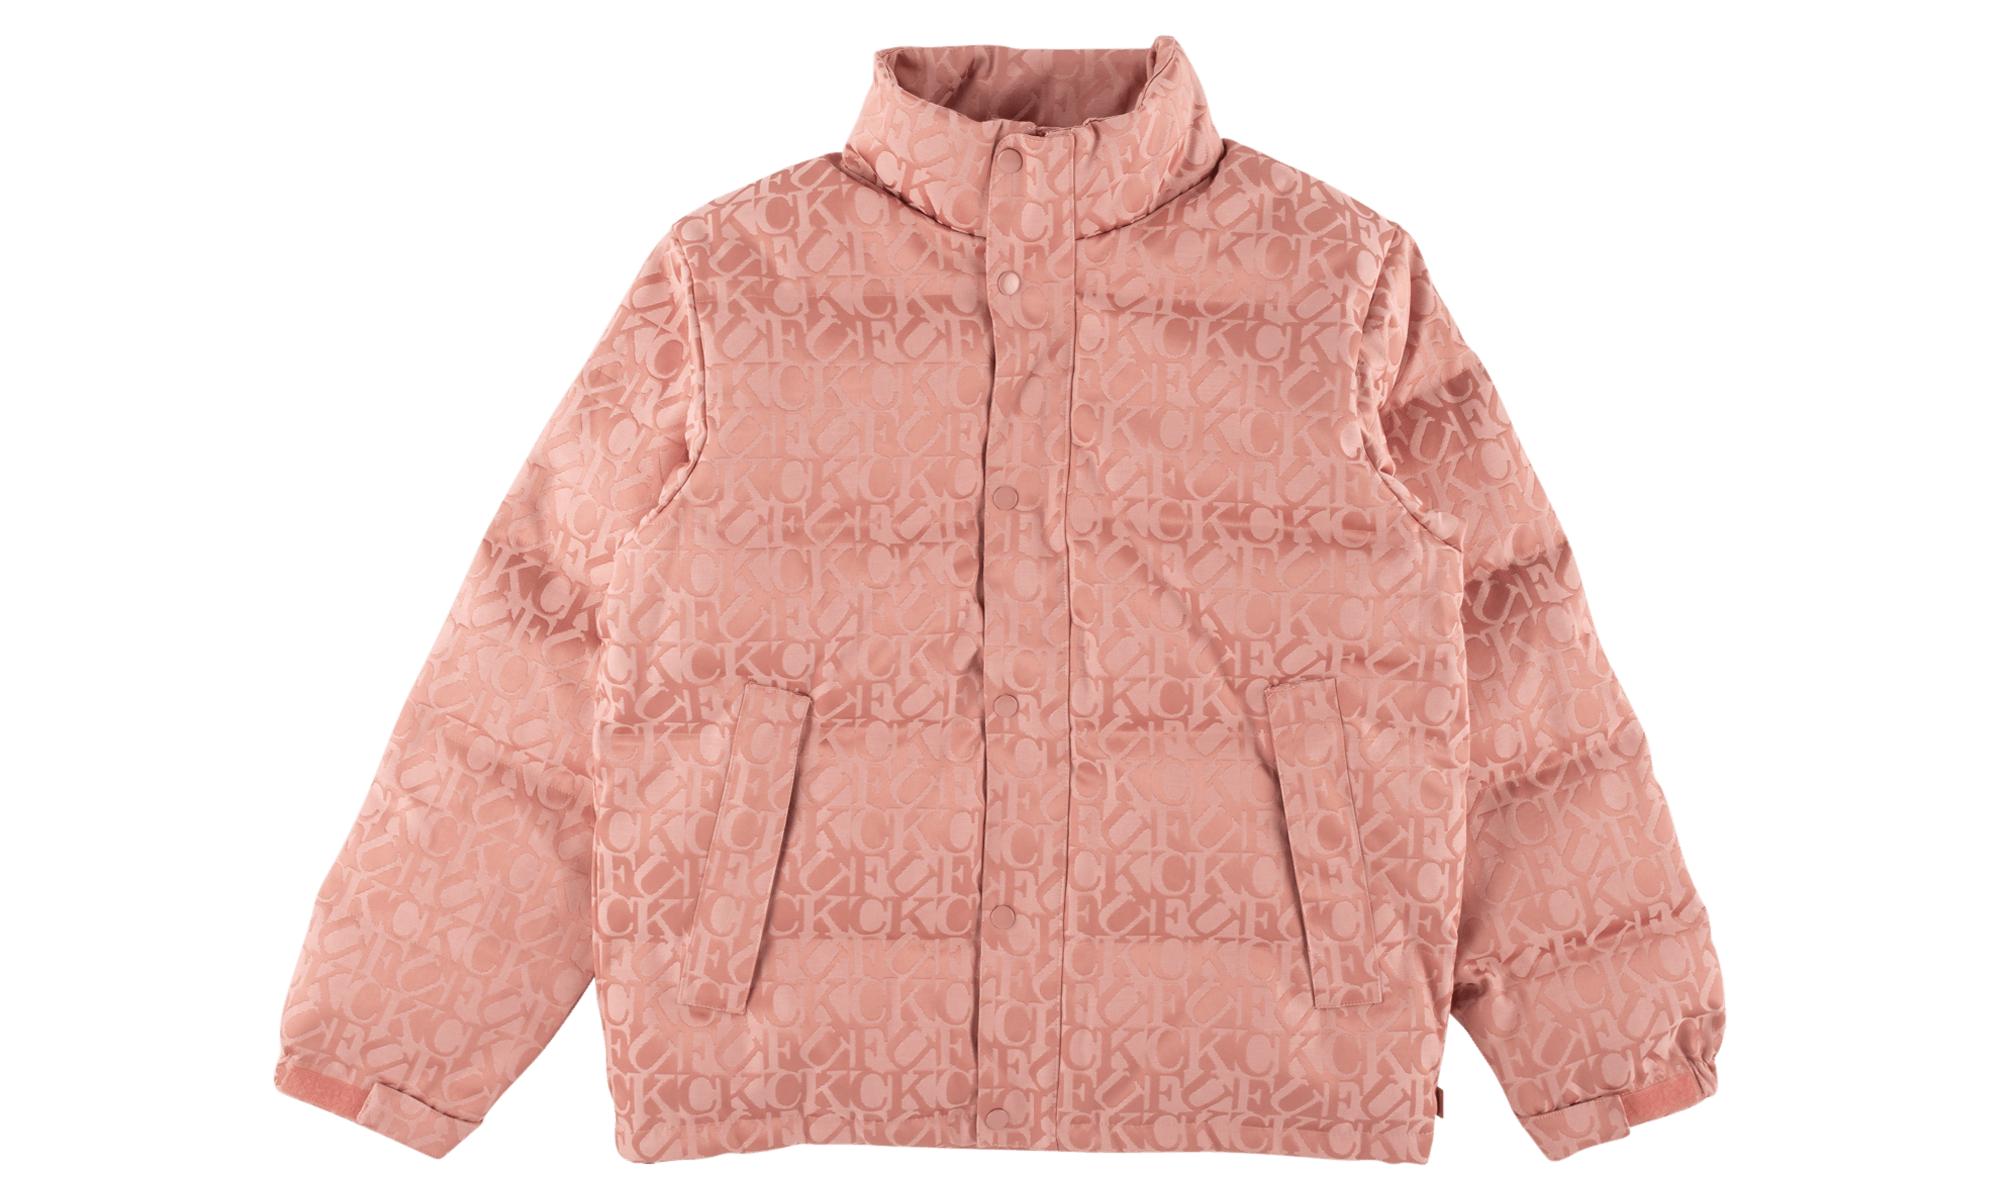 Lyst - Supreme F*ck Jacquard Puffy Jacket in Pink